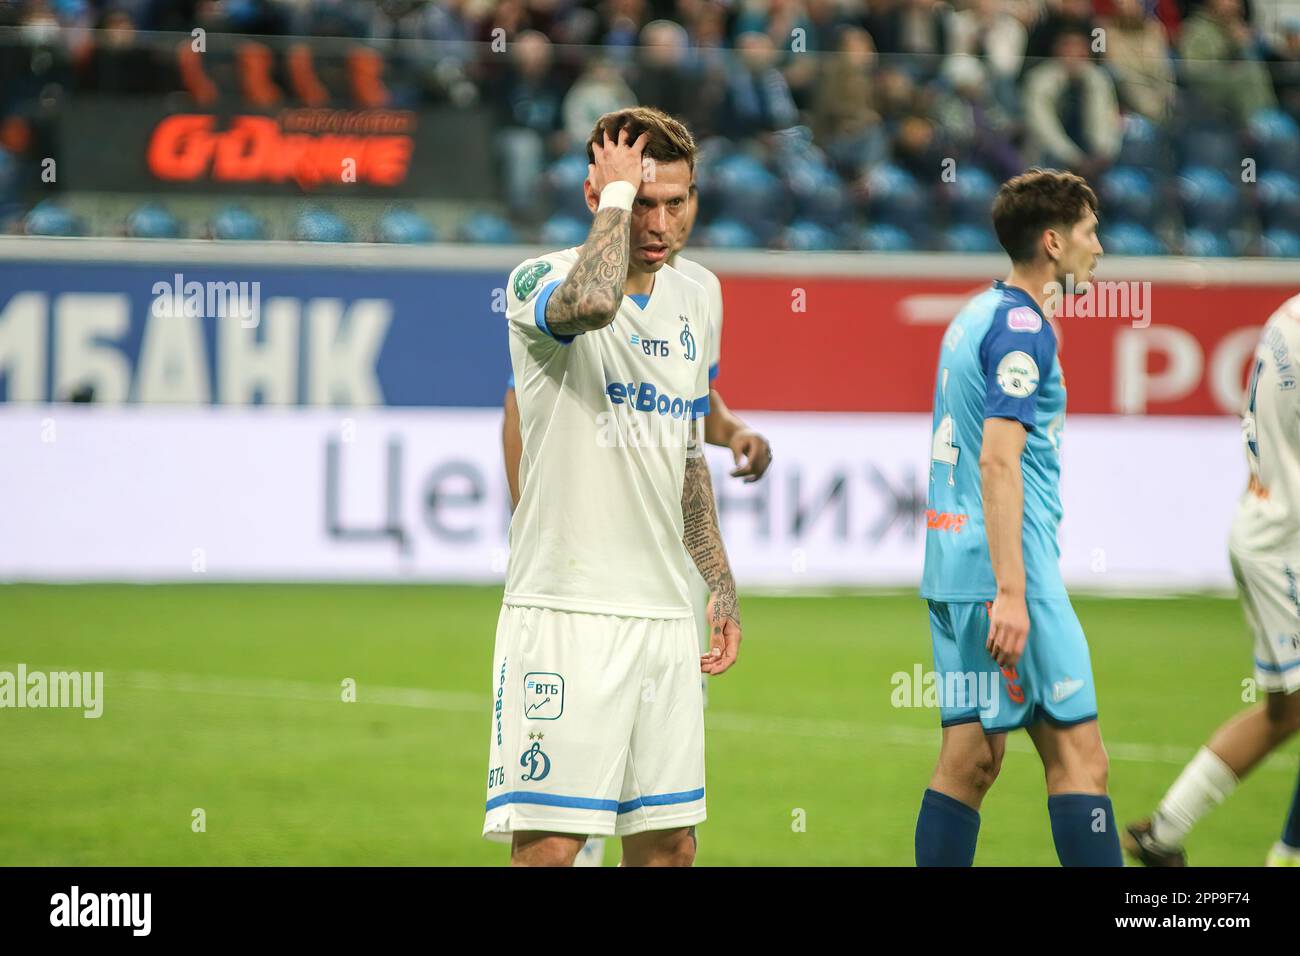 Saint Petersburg, Russia. 22nd Apr, 2023. Fedor Smolov (No.10) of Dynamo seen during the Russian Premier League football match between Zenit Saint Petersburg and Dynamo Moscow at Gazprom Arena. Zenit 3:1 Dynamo. Credit: SOPA Images Limited/Alamy Live News Stock Photo